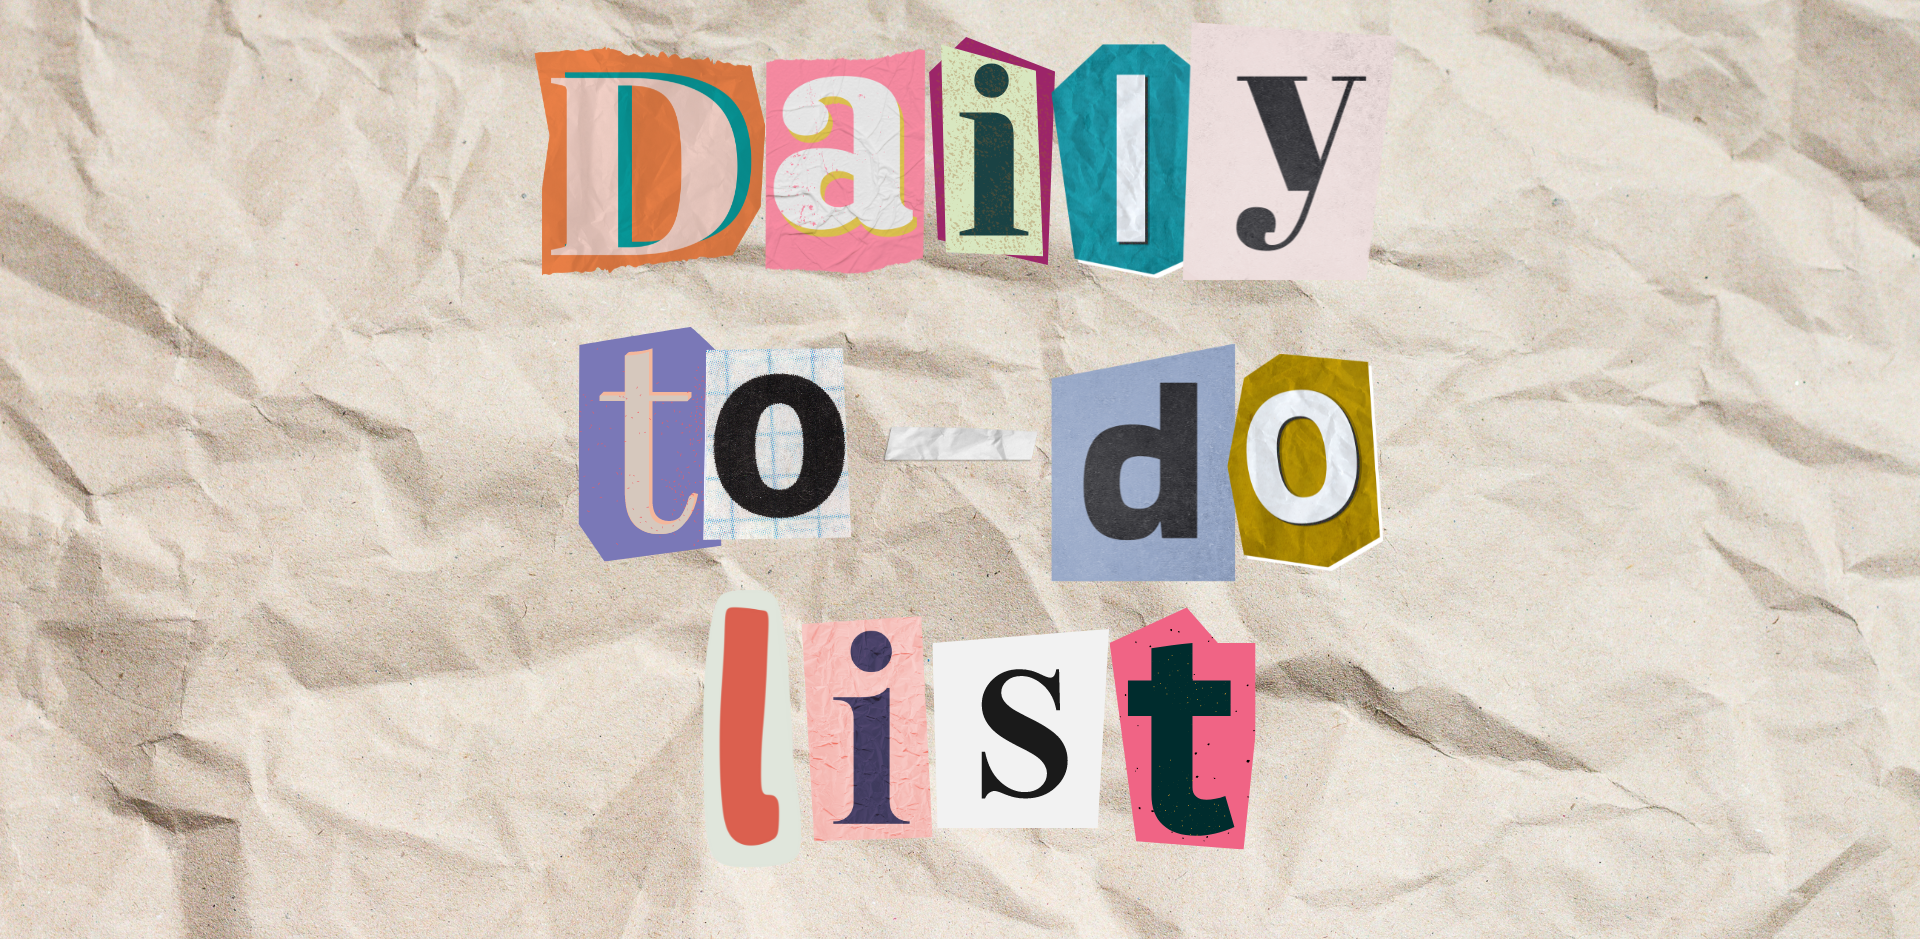 Collage of cutout letters on wrinkled paper spelling &quot;Daily to-do list&quot; for work organization